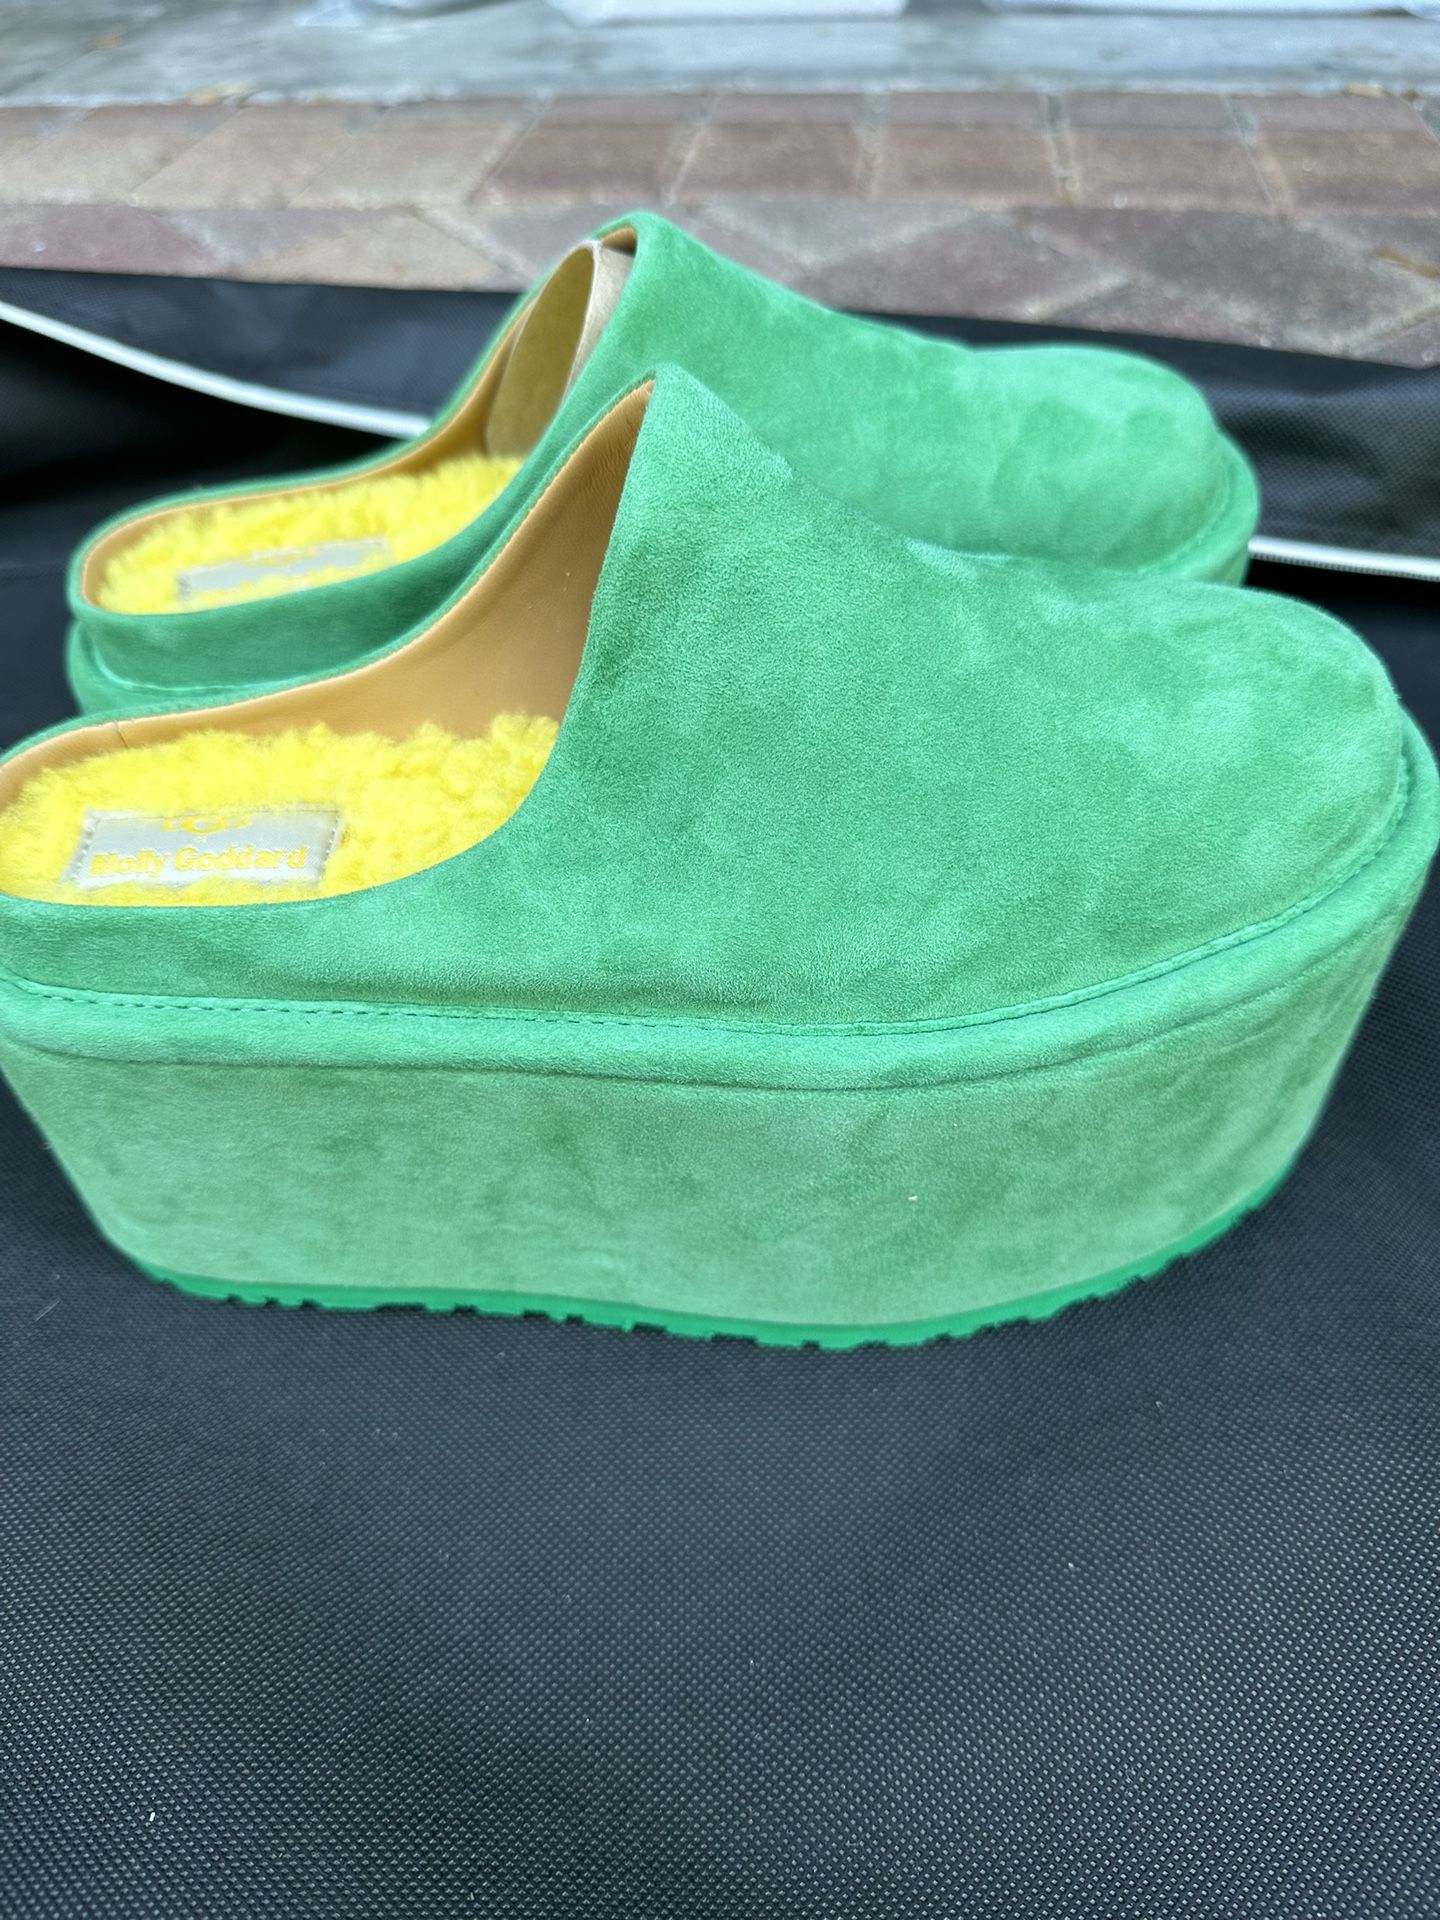 Ugg Green Clogs Size 7